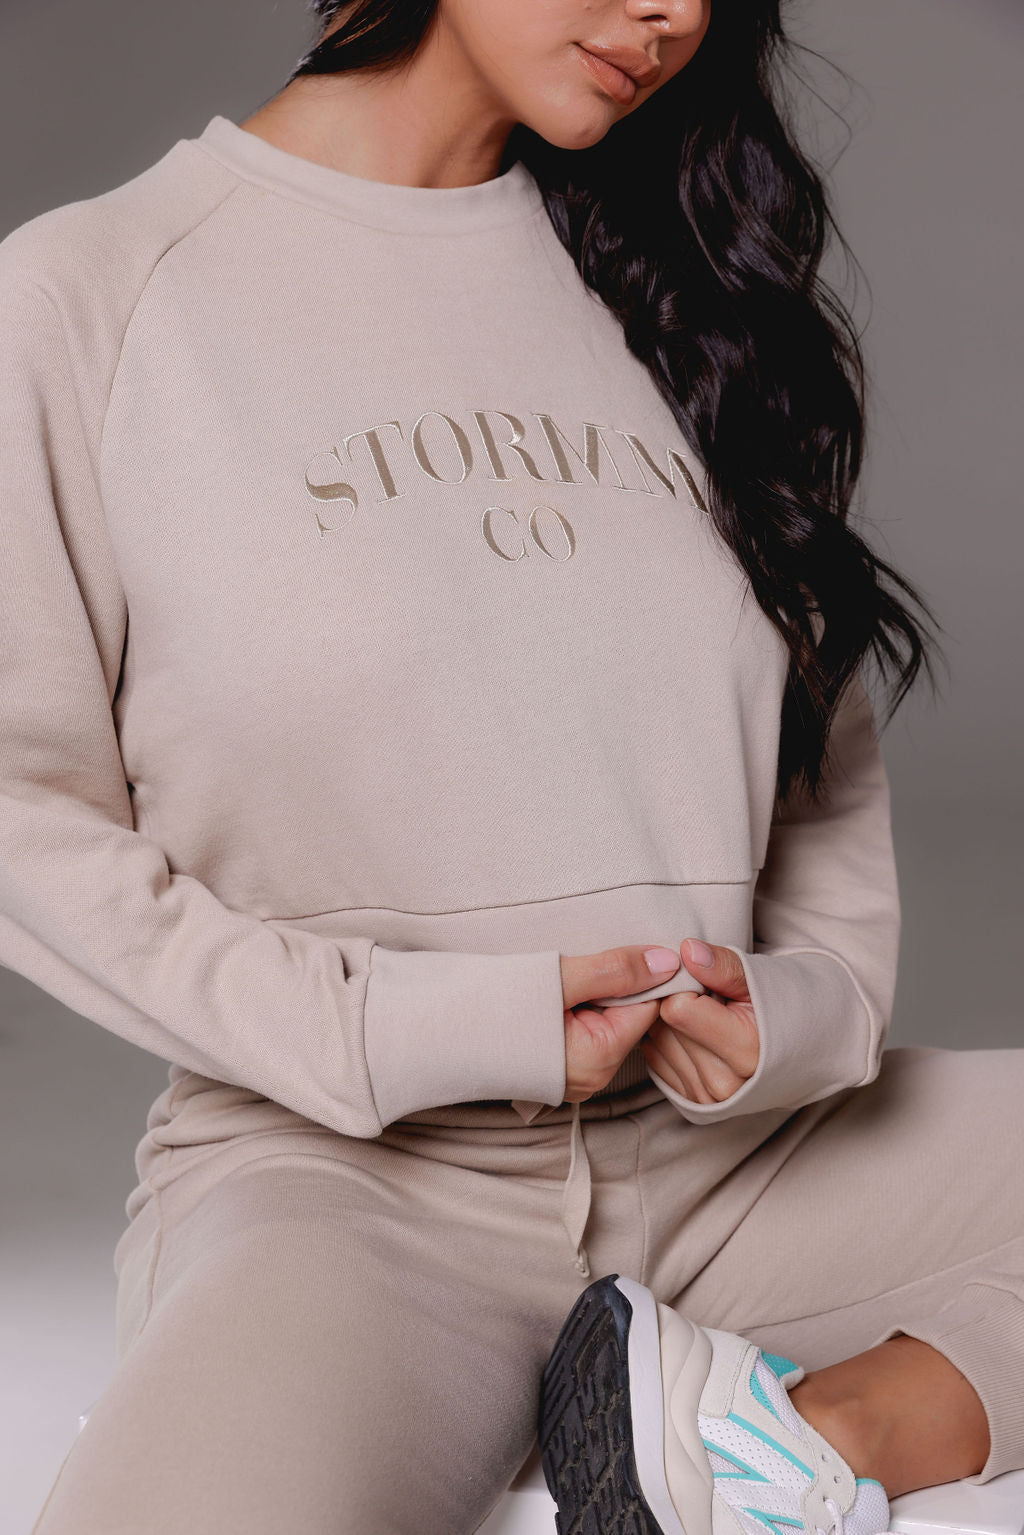 Cropped jumper in tan from Stormm Co's Hues of Happiness collection, made from soft French terry cotton, relaxed fit, and embroidered unique design.